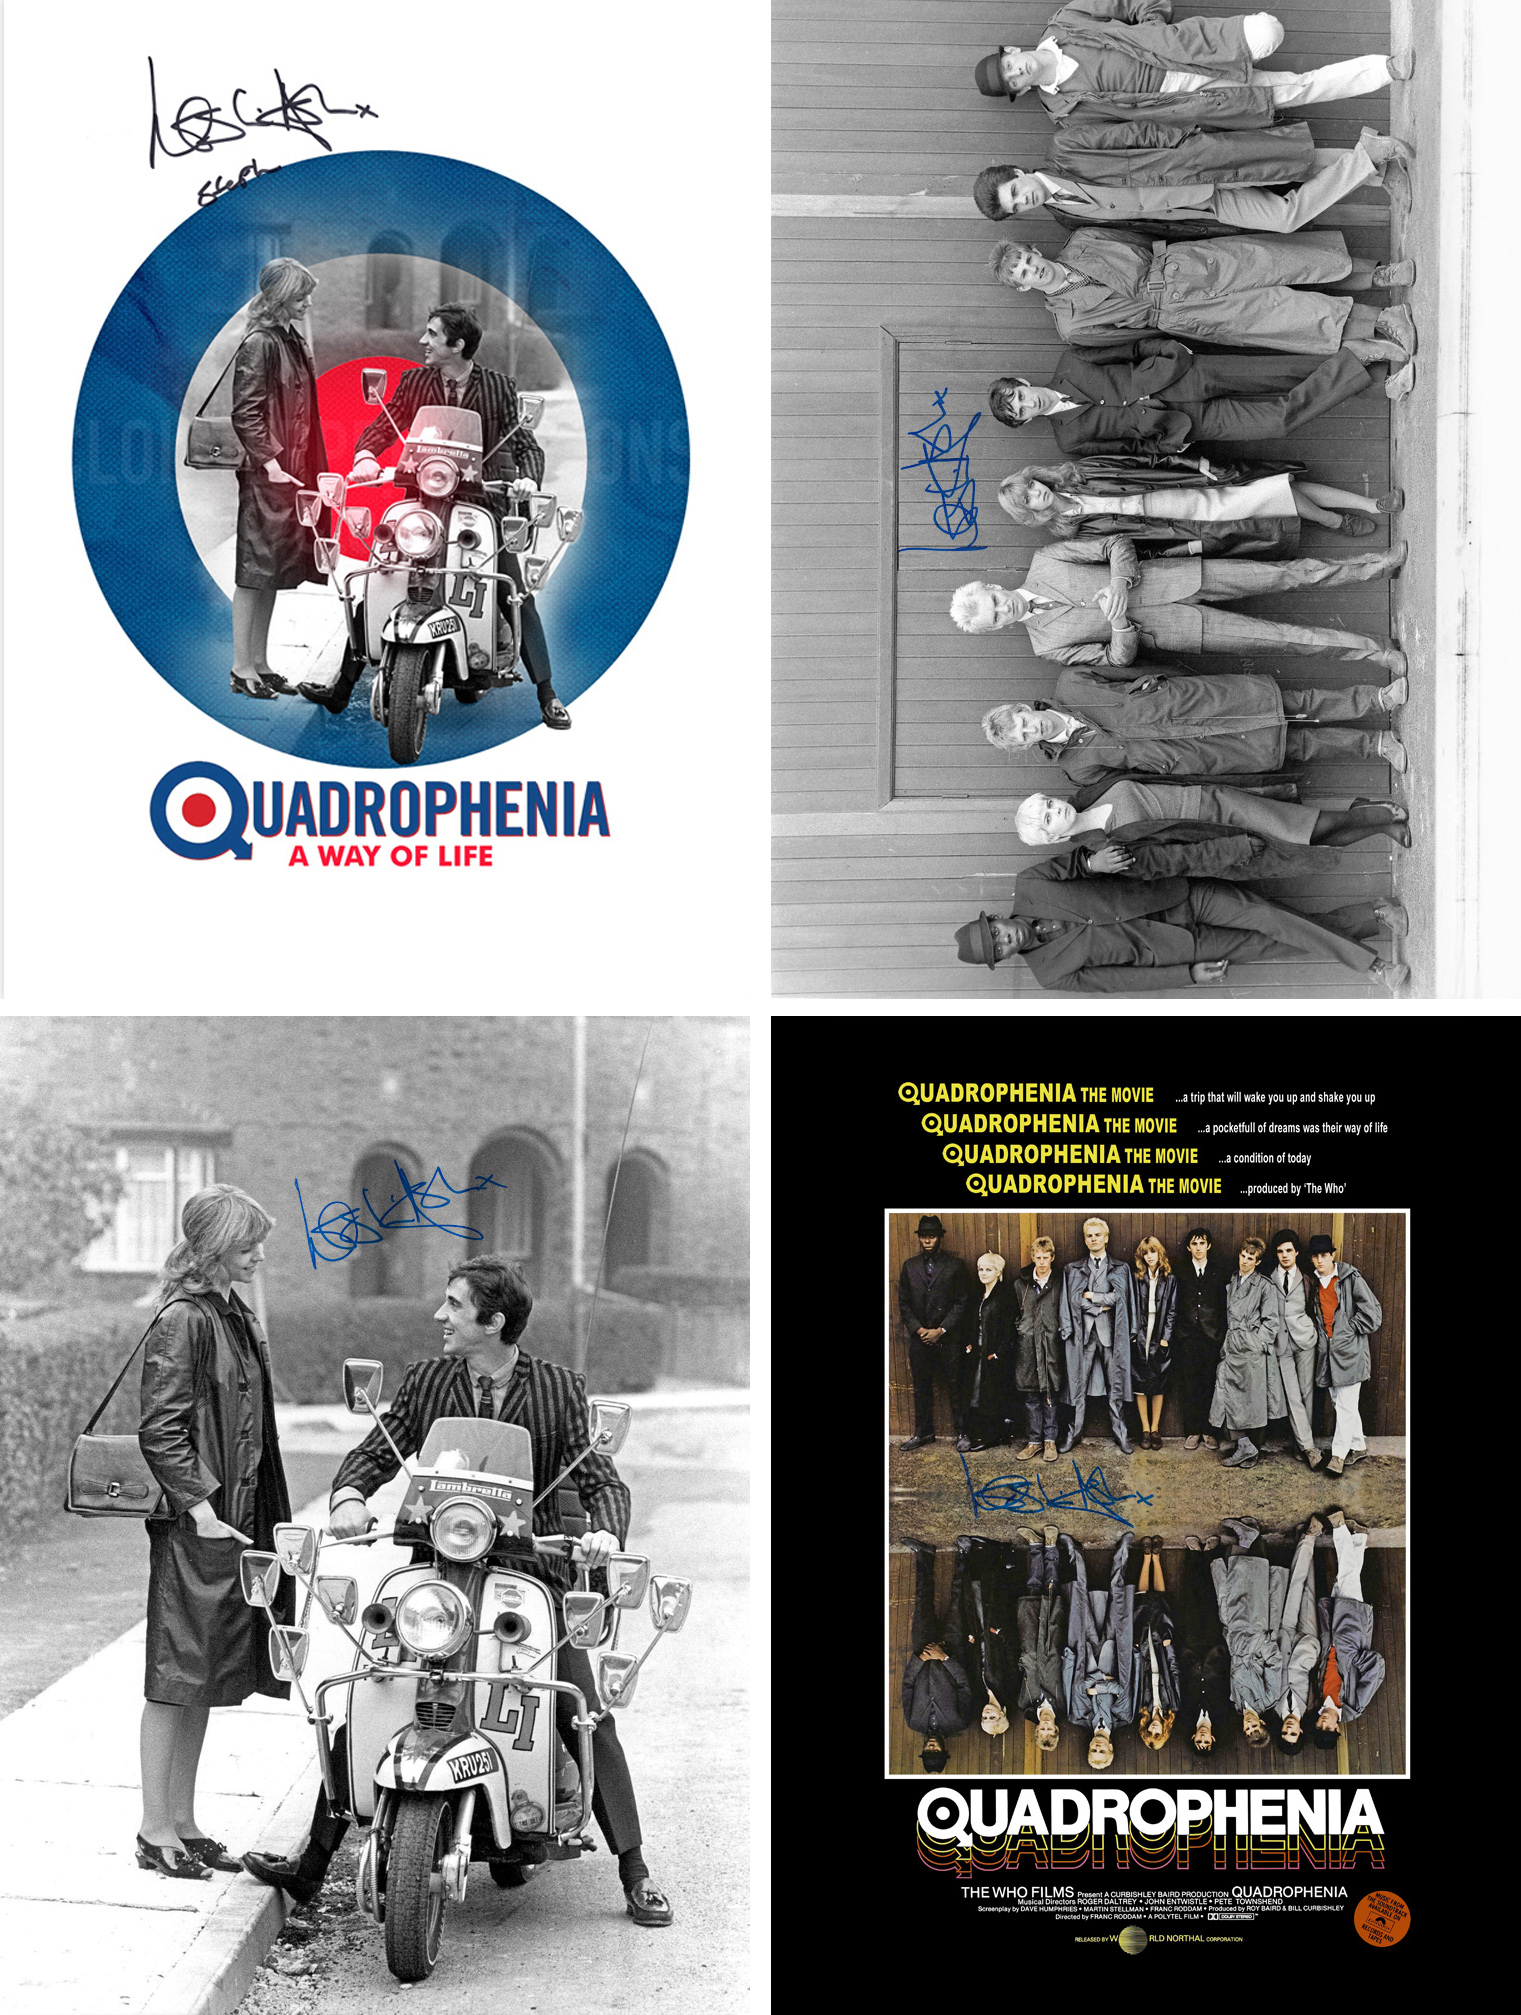 SALE! Lot of 4 Quadrophenia hand signed 16x12 photos. This is a beautiful lot of 4 hand signed large